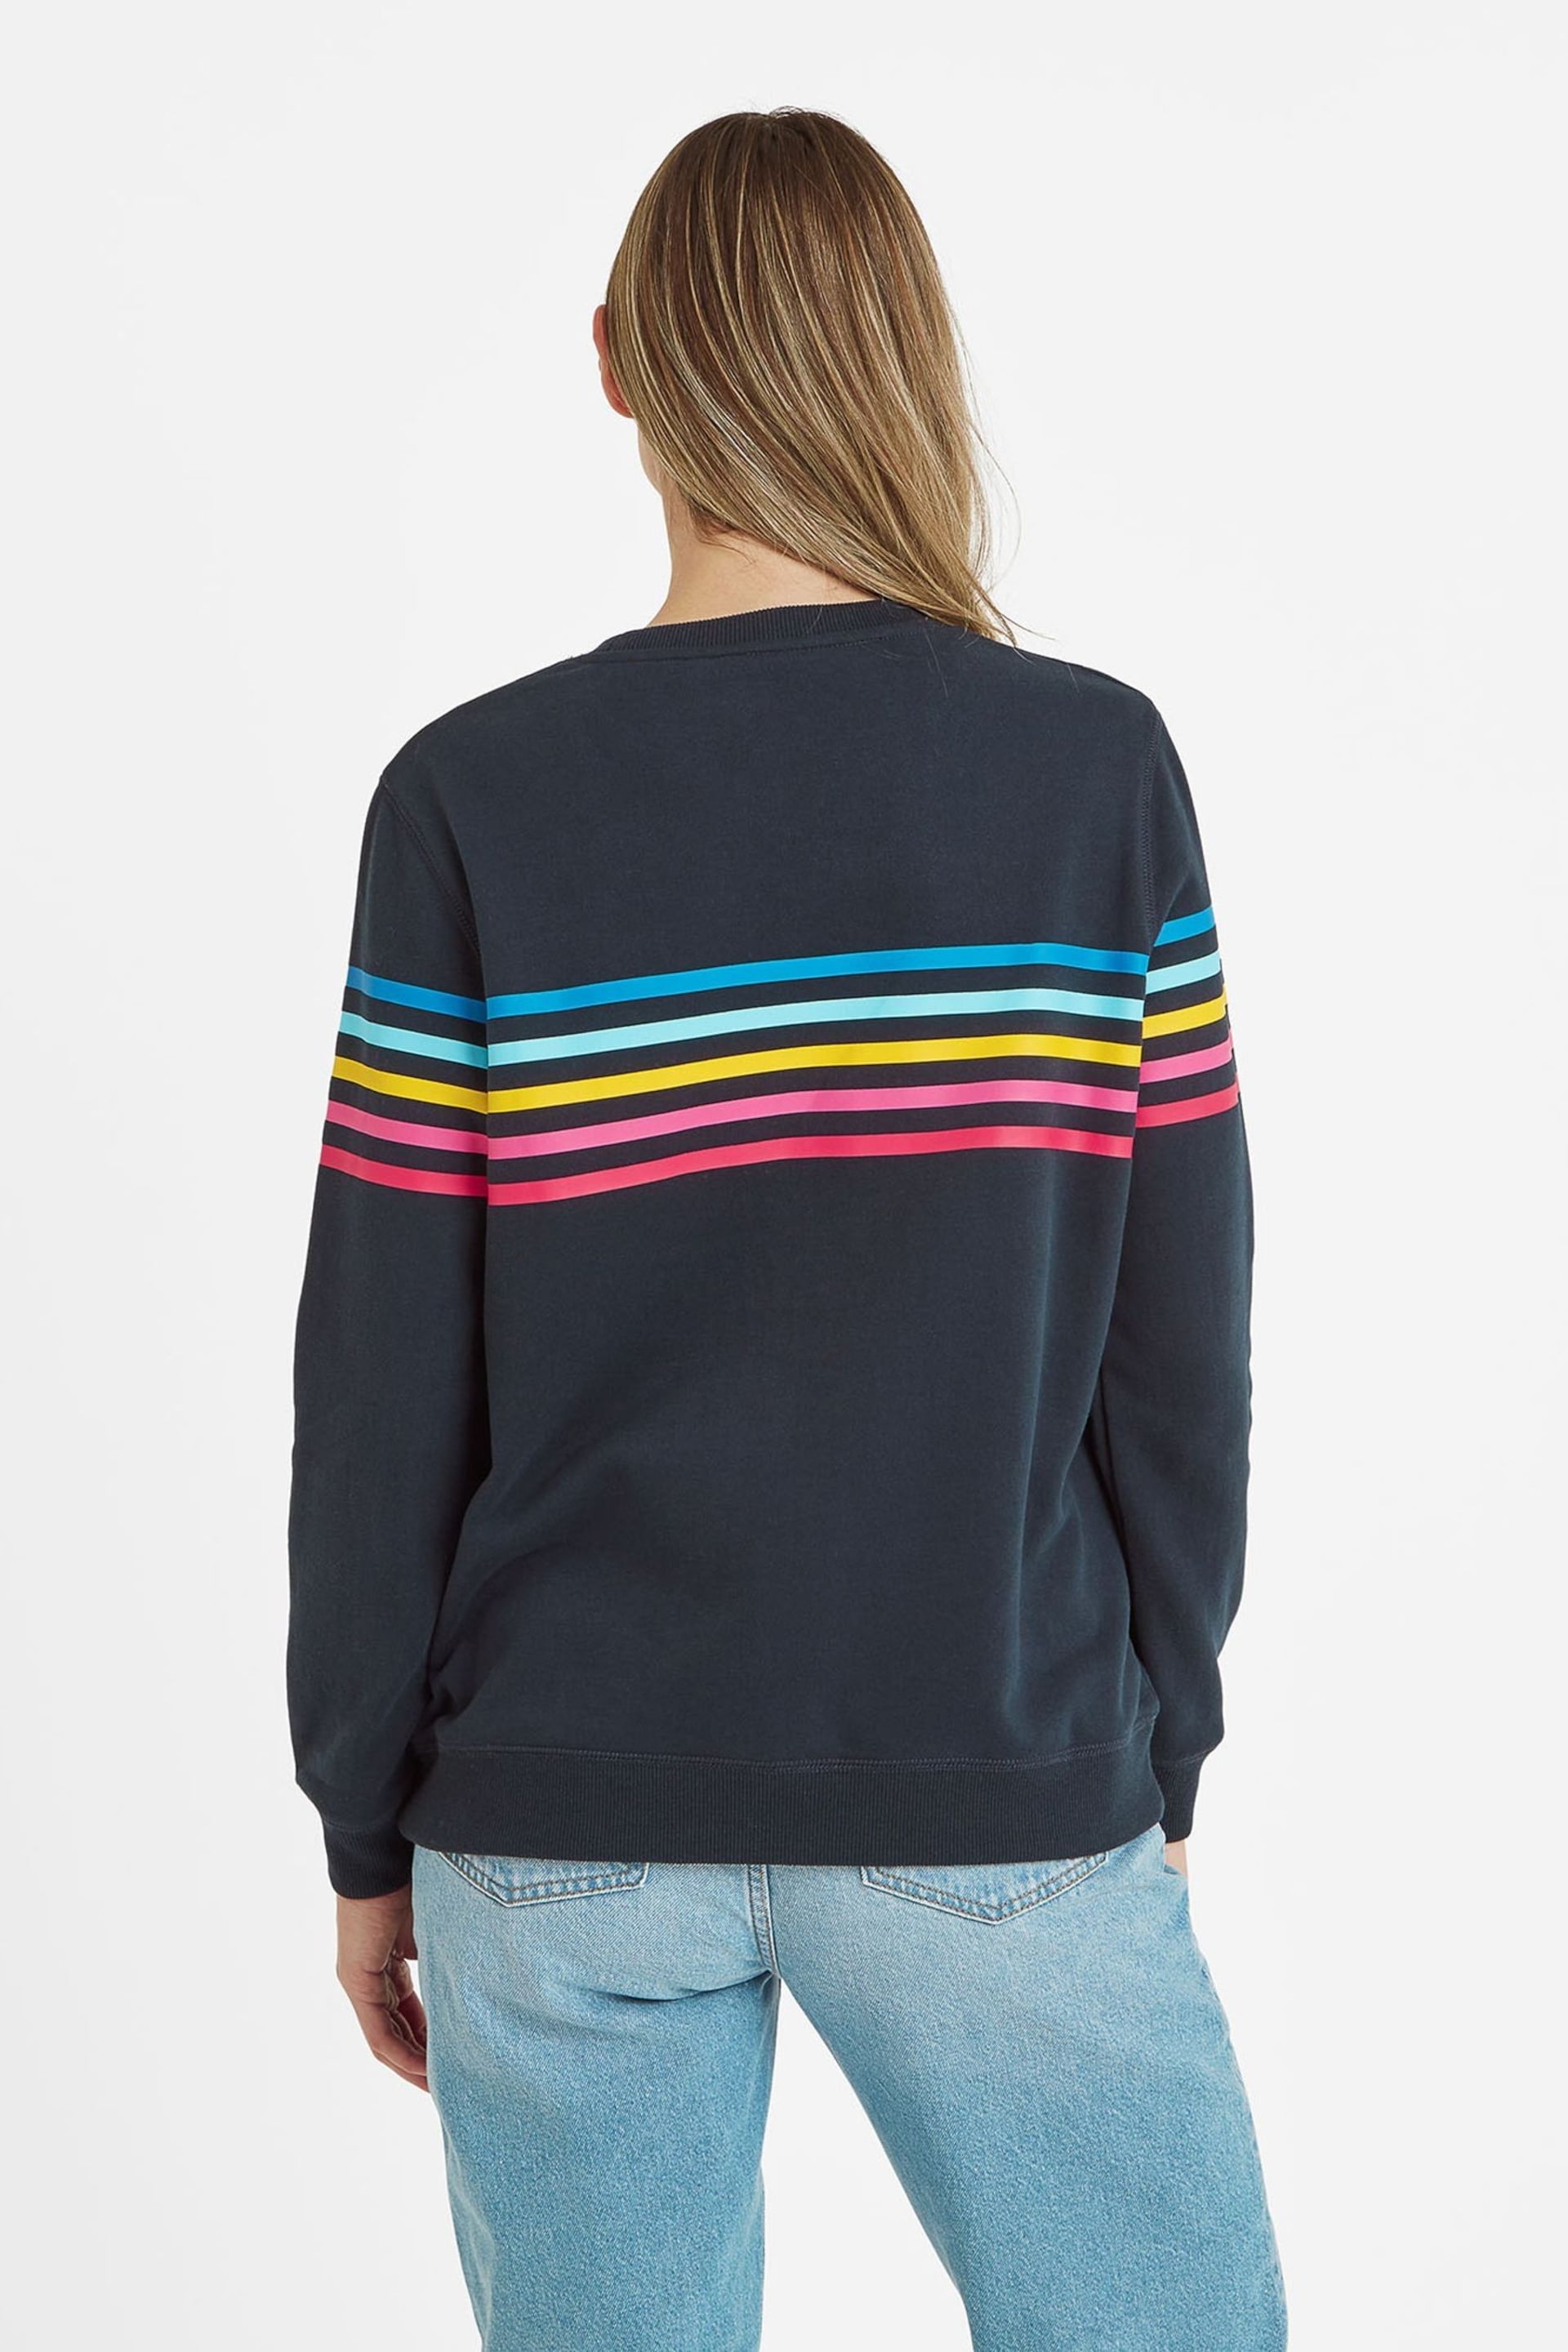 Tog 24 Navy Blue Janie Sweater - Image 3 of 4